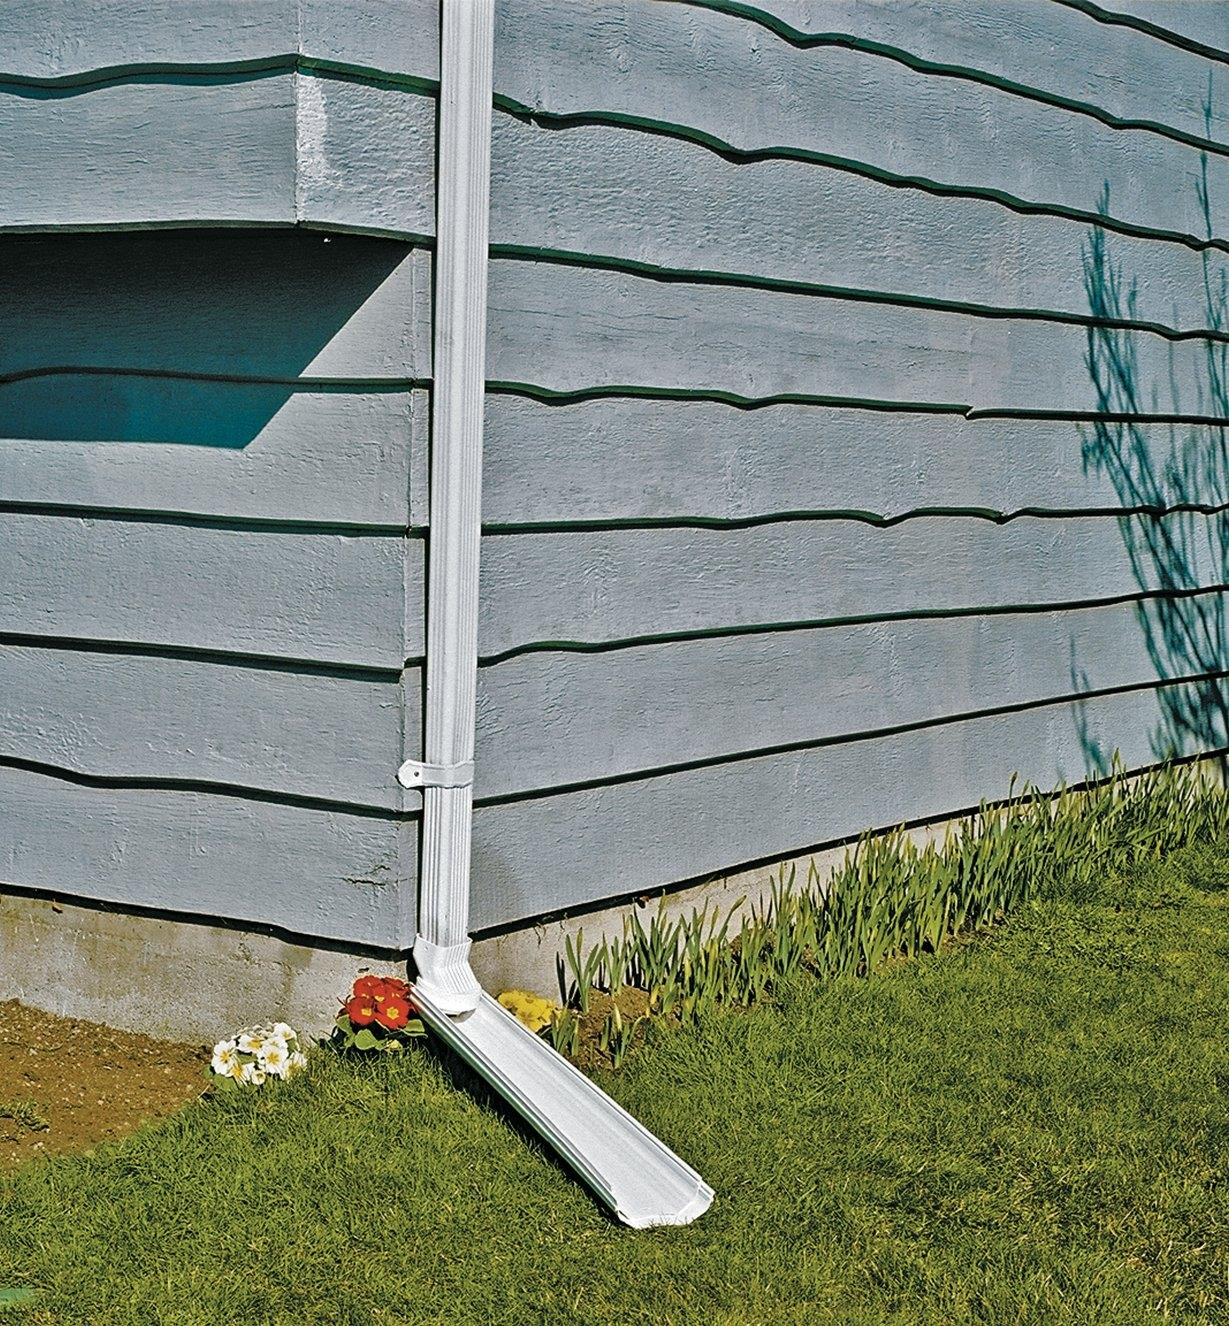 Adjustable Downspout attached to a downspout, in down position